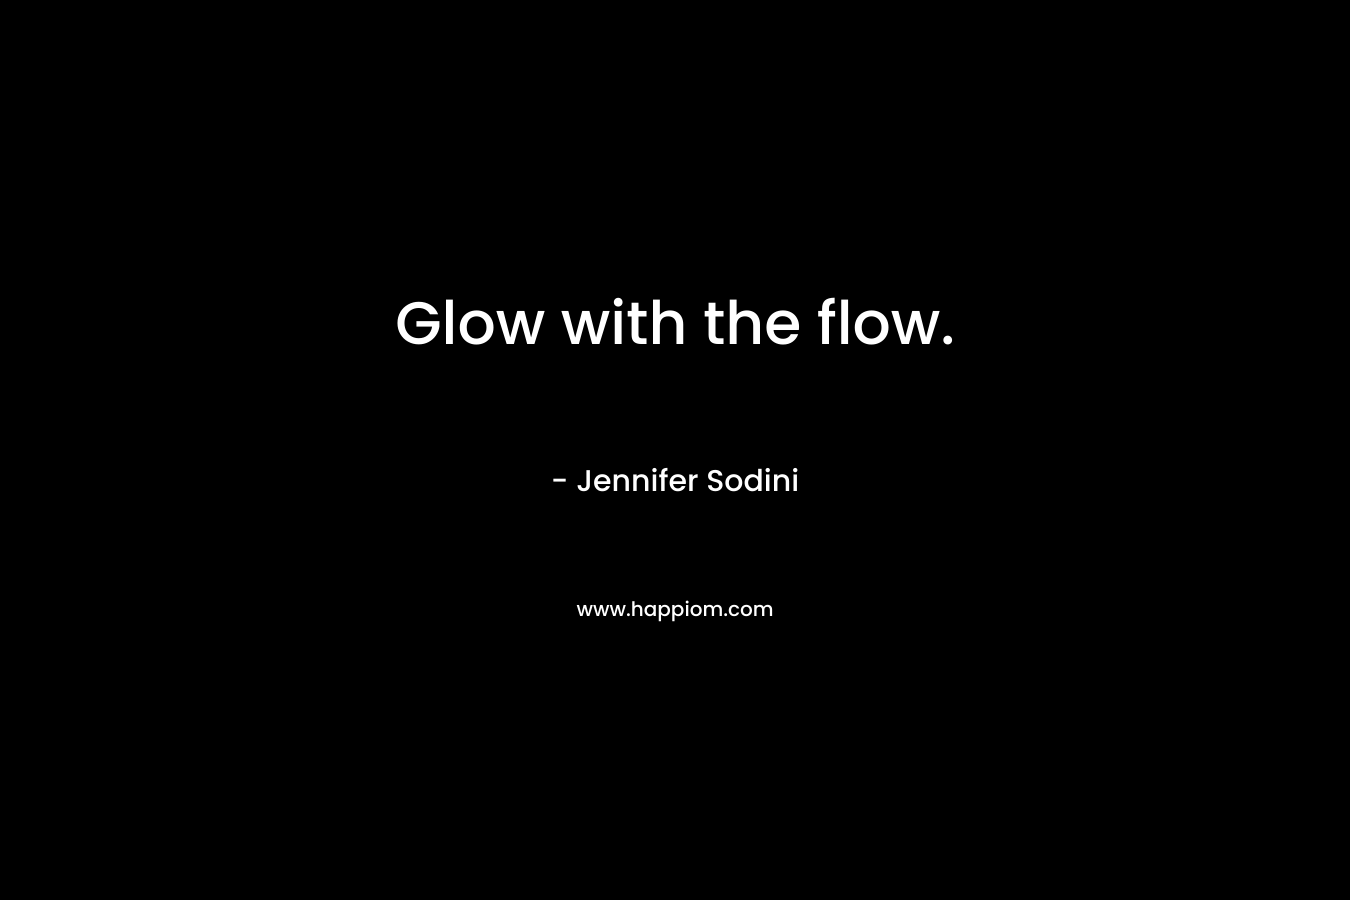 Glow with the flow.